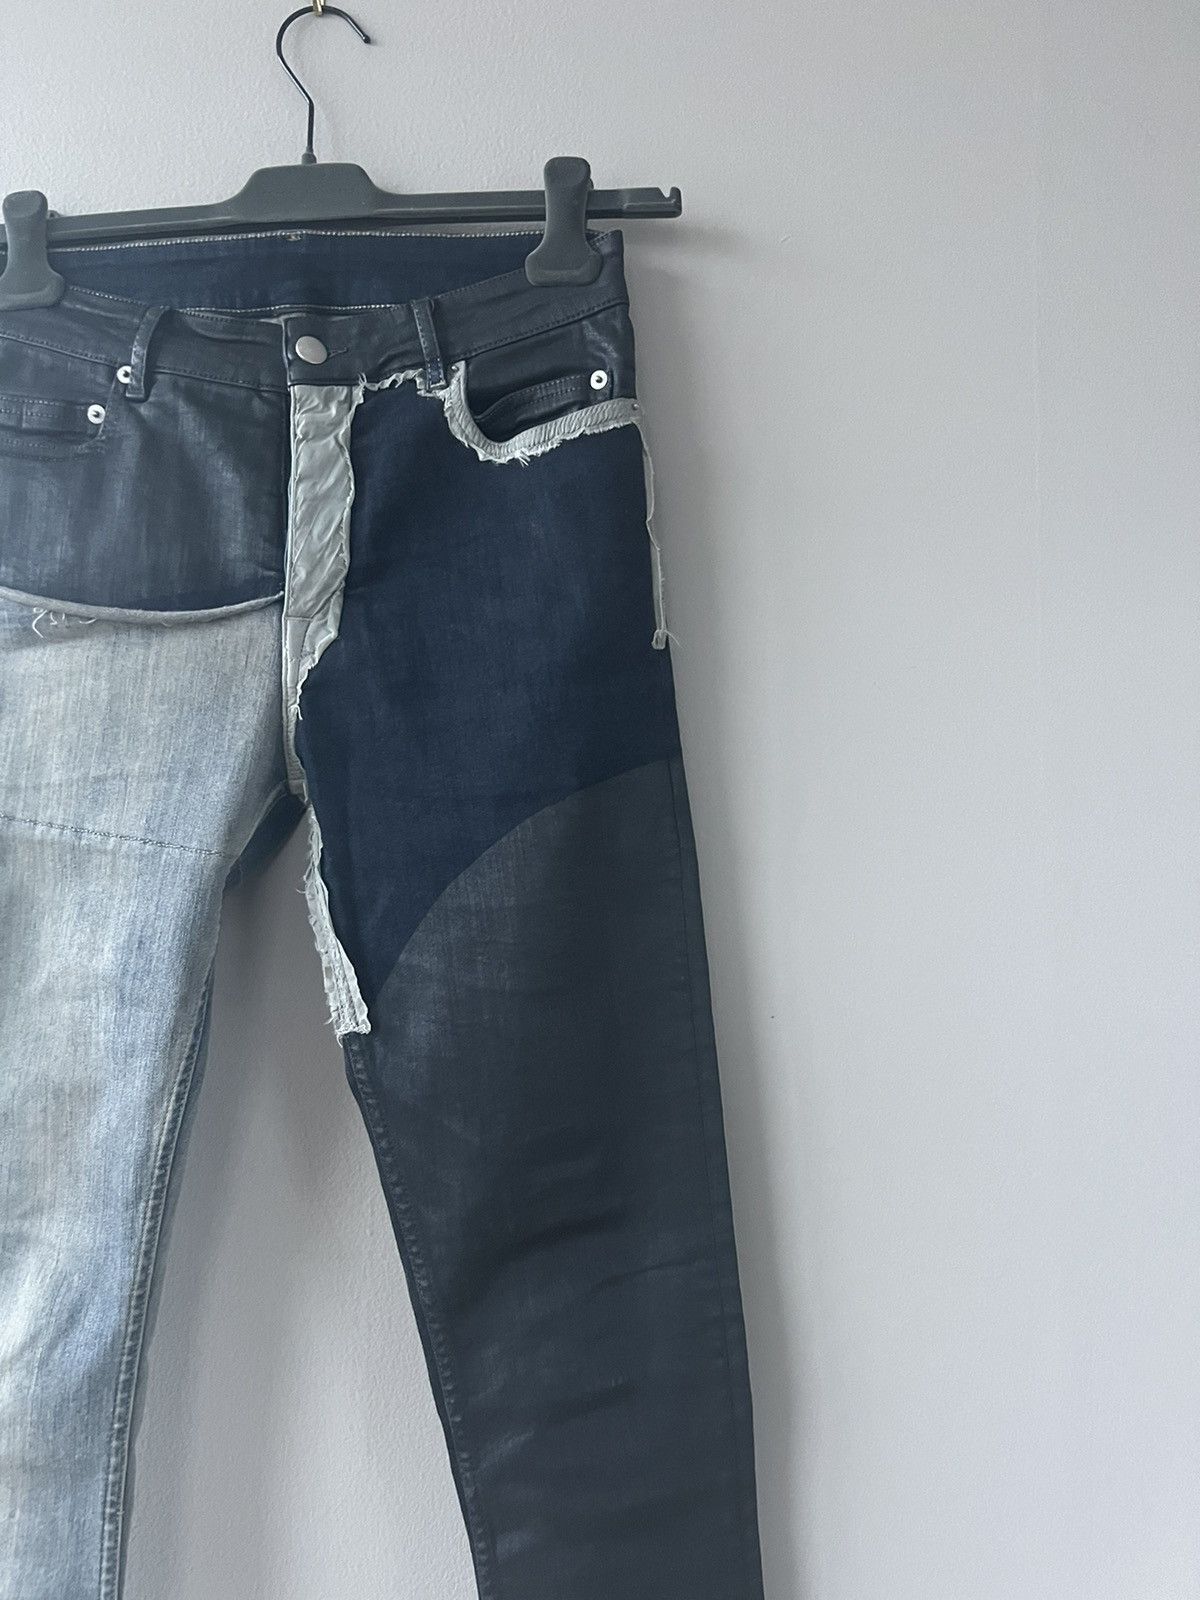 SS19 BABEL Combo Tyrone Jeans - 3